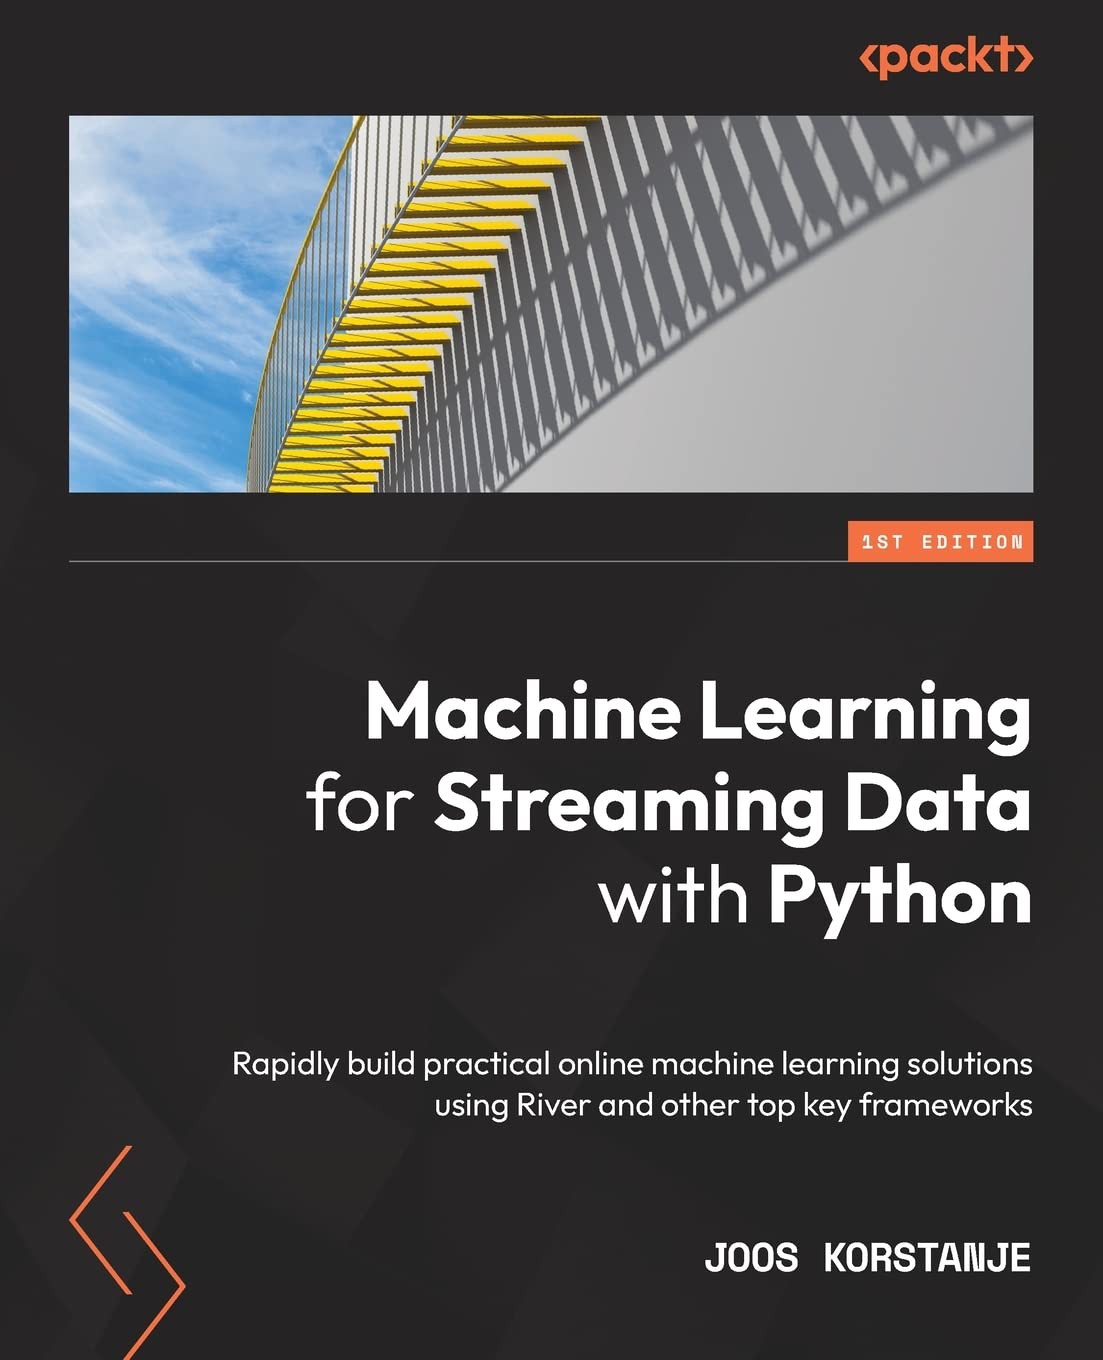 Machine Learning for Streaming Data with Python: Rapidly build practical online machine learning solutions using River and other top key frameworks by Joos Korstanje